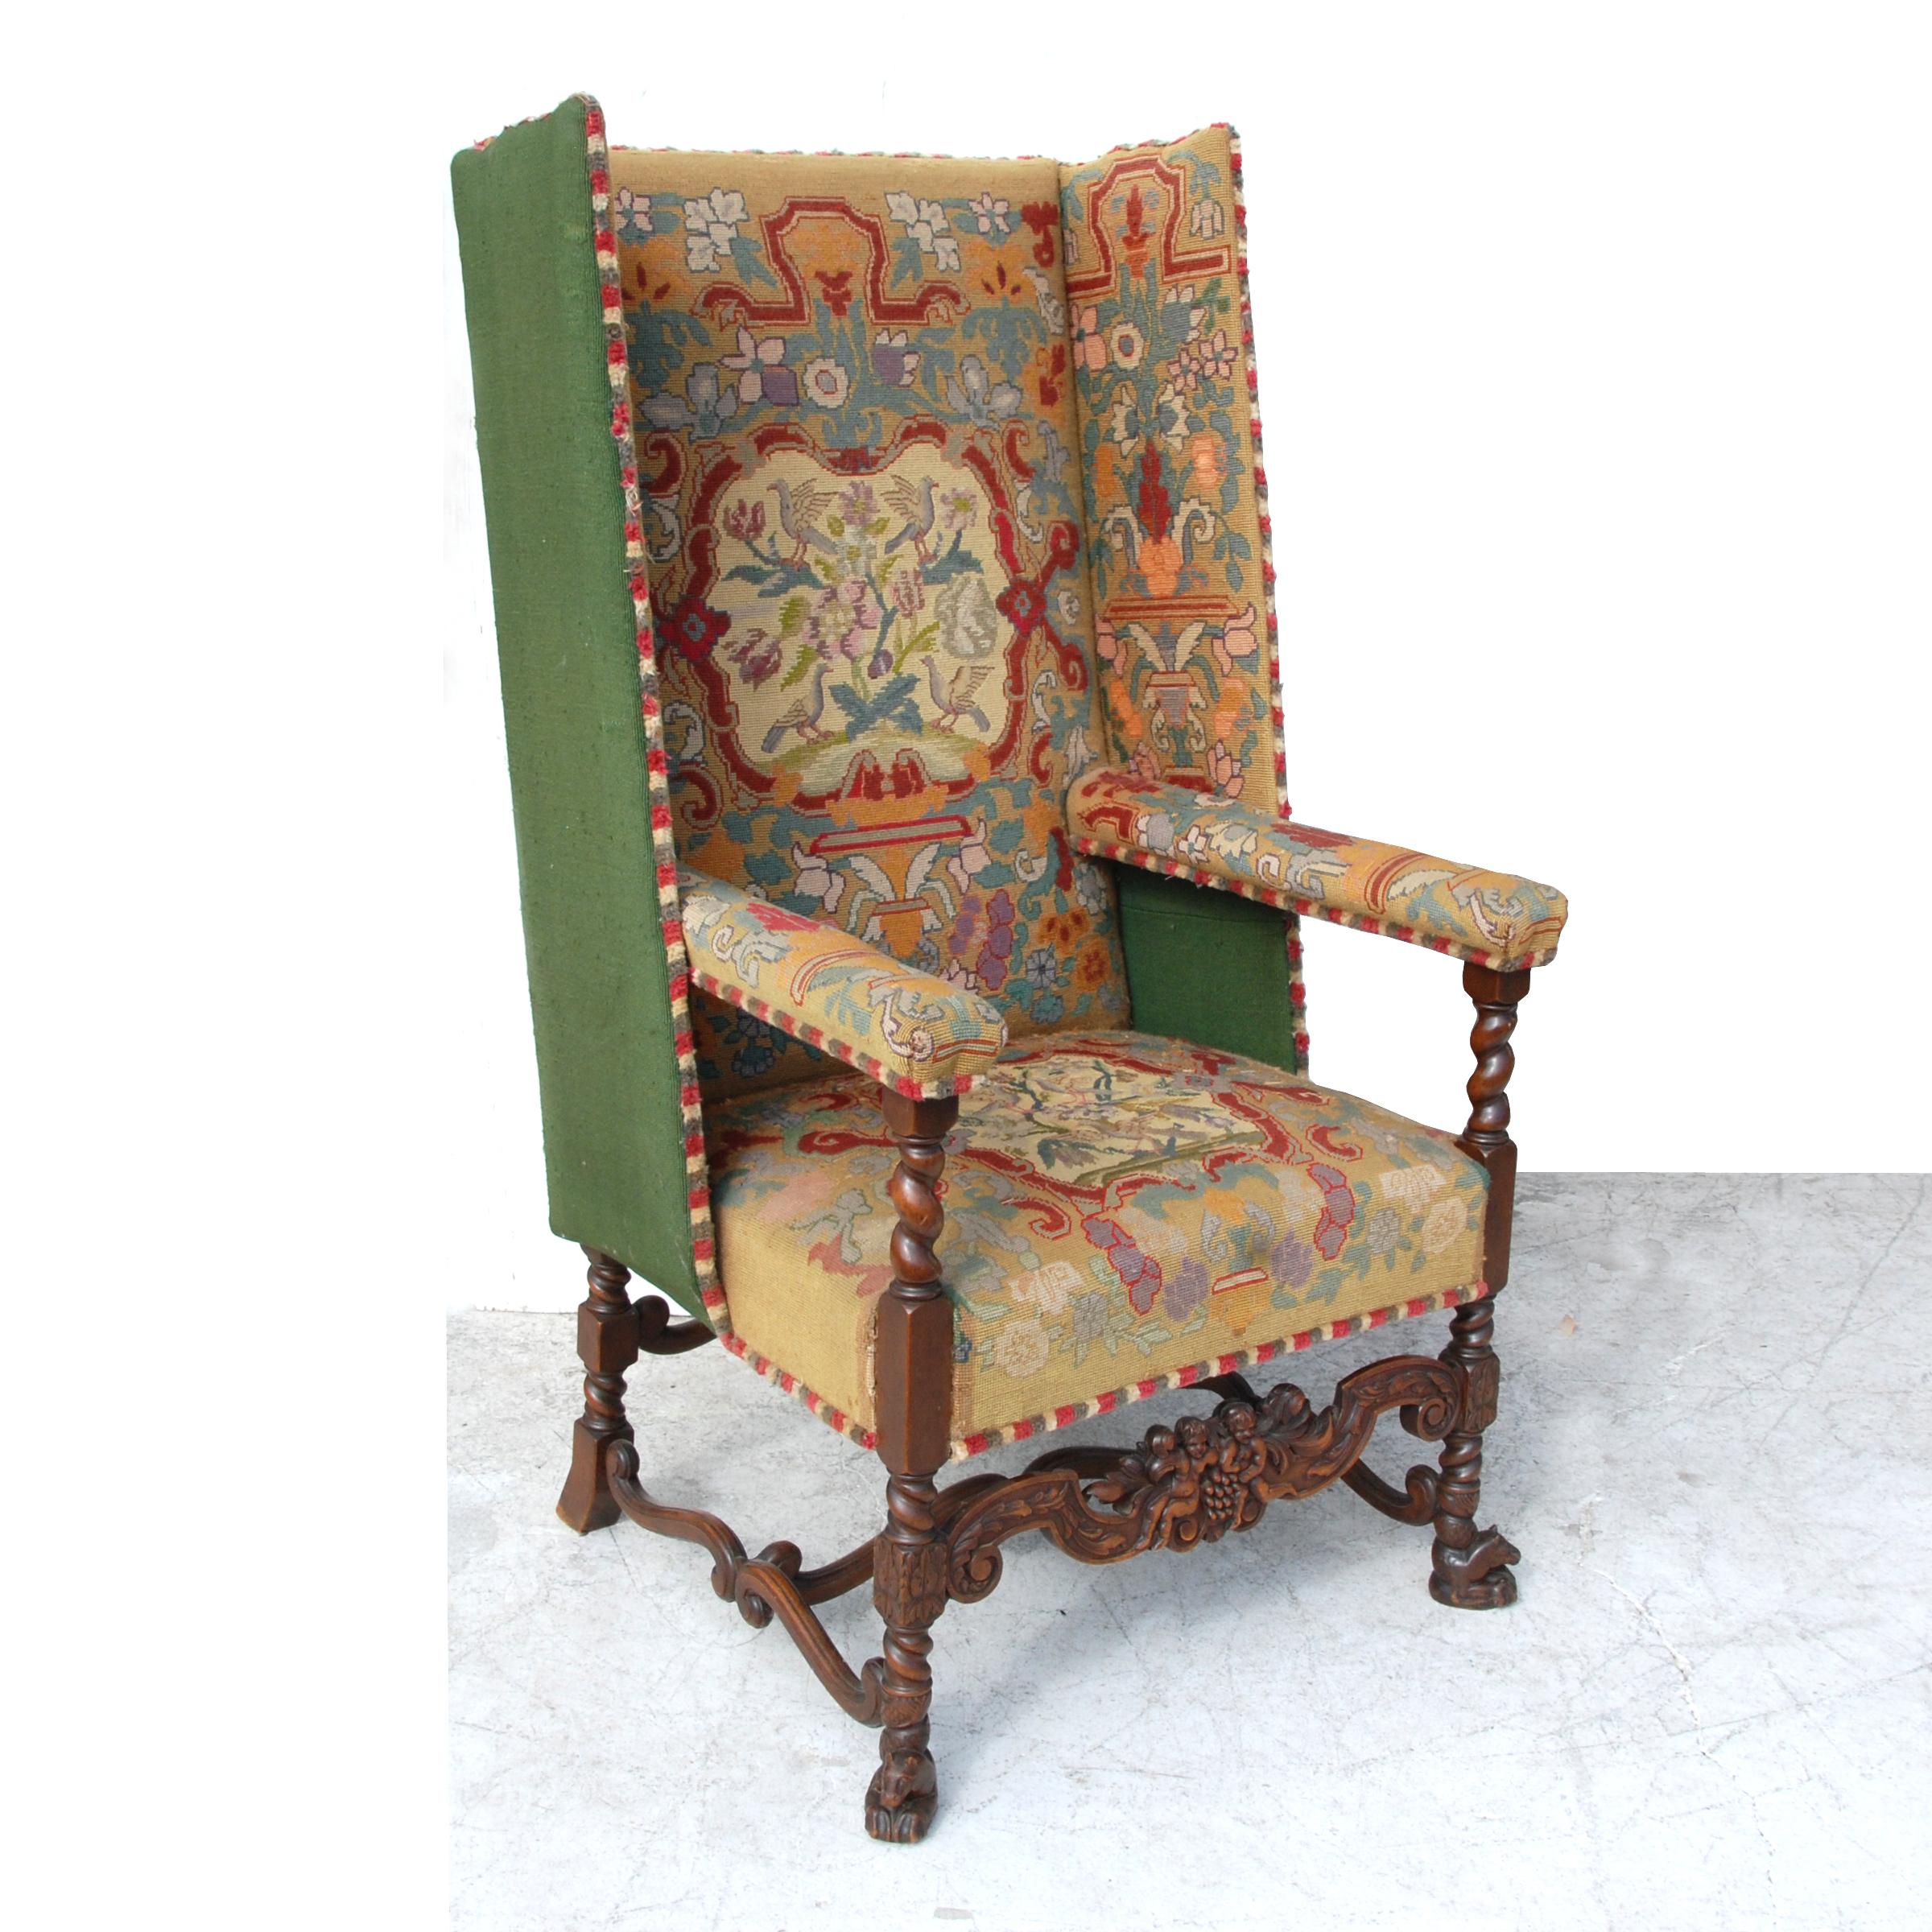 4.5ft needlepoint upholstery wingback armchair

This large armchair features intricate needlepoint upholstery, with detailed cherub and wolf carvings on woodwork. Cherubs line the wooden stretcher, while mythological Hippocampus' are shown on